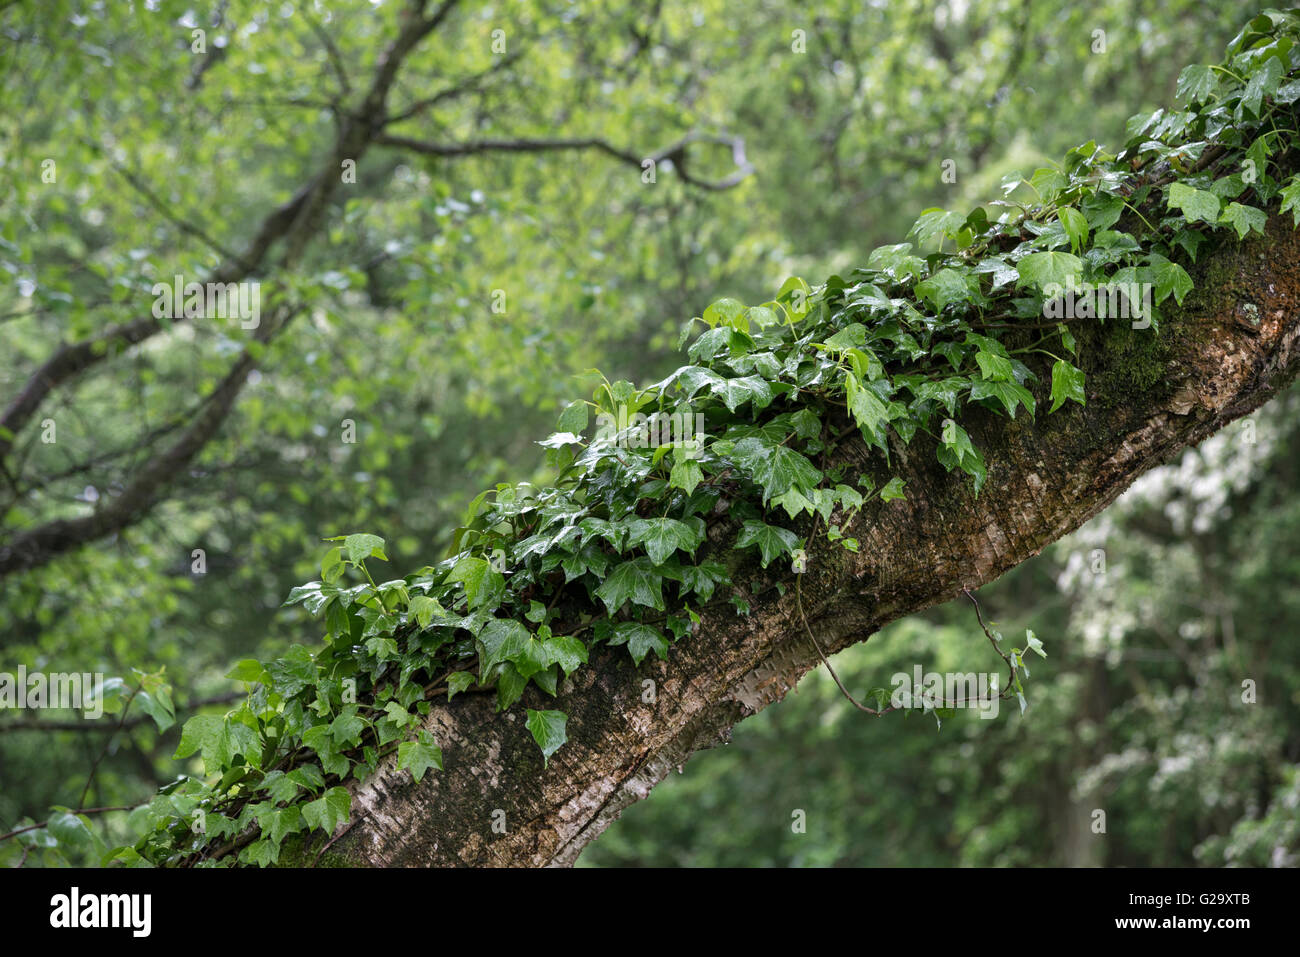 Green Ivy (Hedera helix) climbing up a tilted Silver Birch tree in an English woodland. Stock Photo